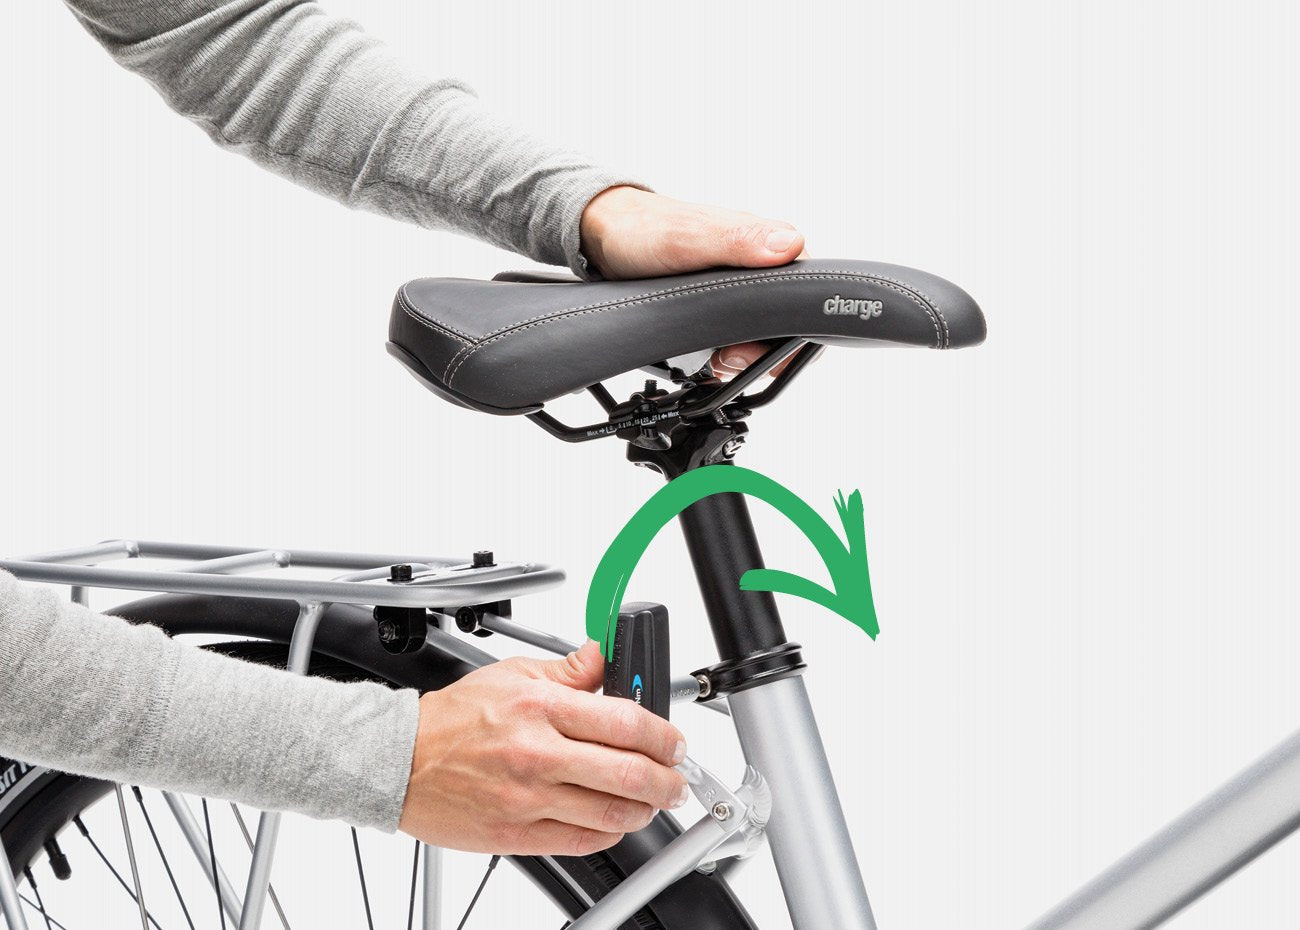 How to properly tighten an electric bike saddle using torque wrench